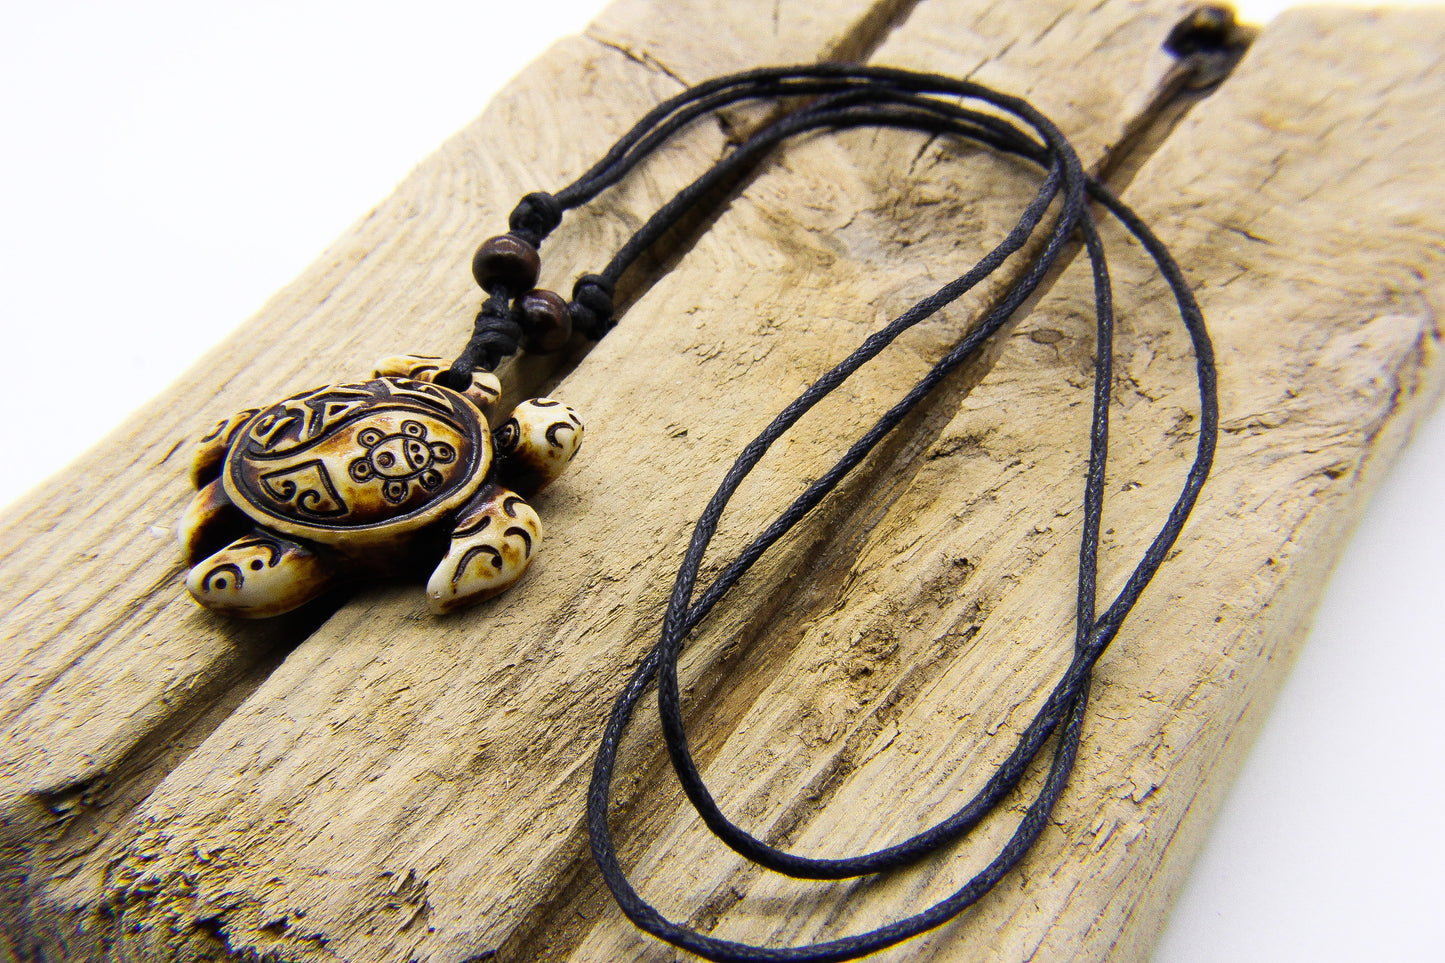 Black cord necklace with decorative sea turtle pendant on a piece of slatted wood